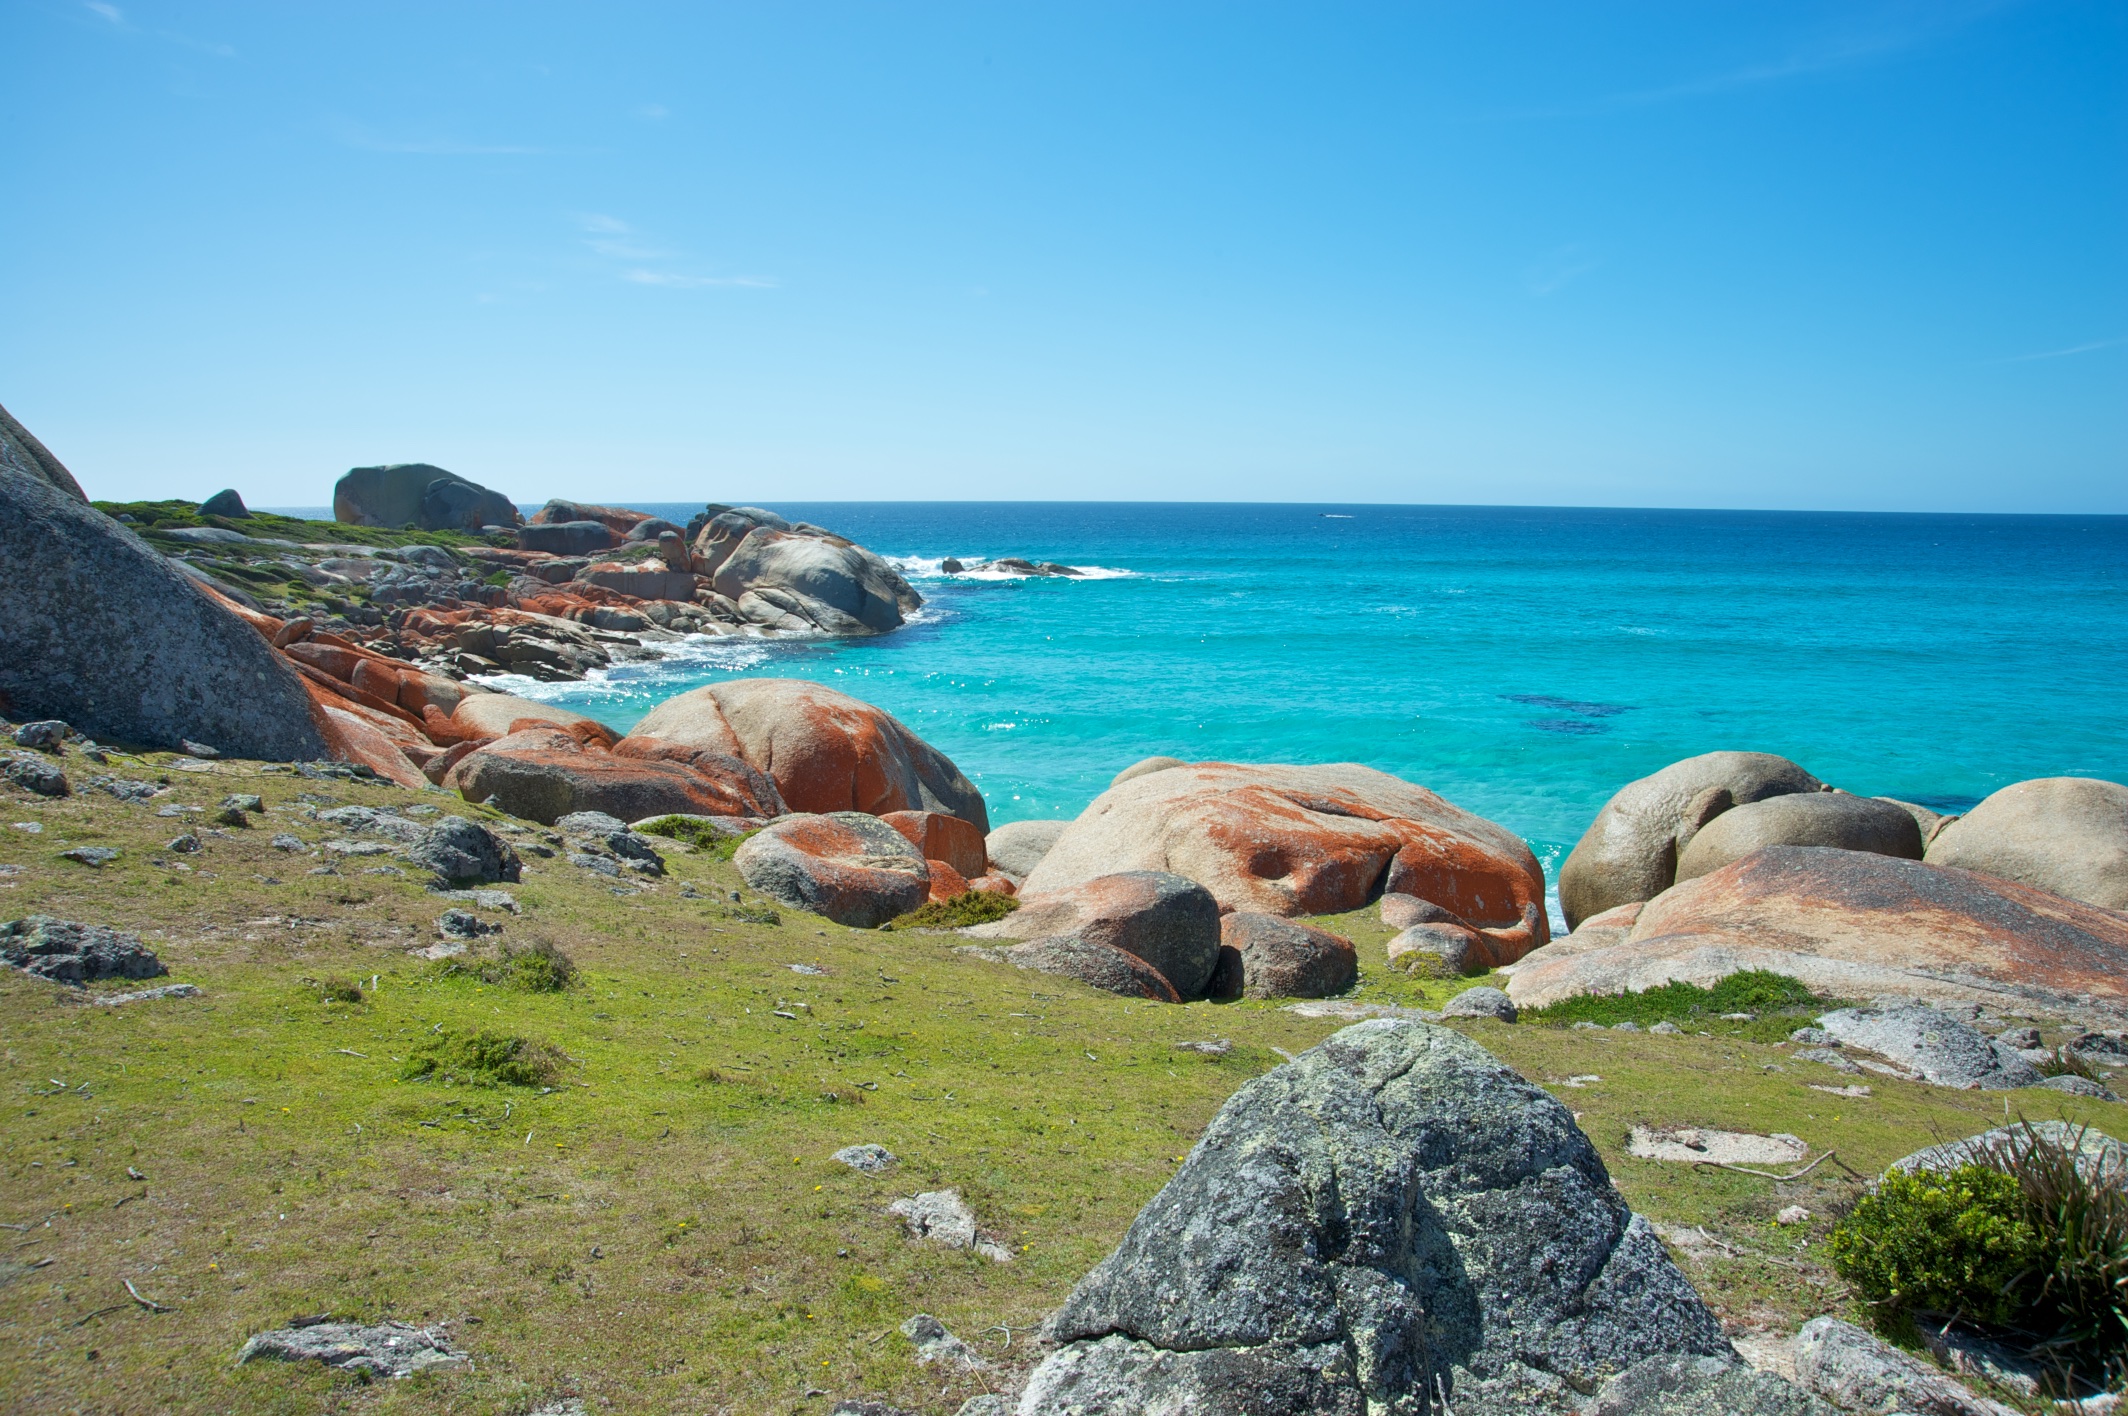 View from Bayley Rocks, Bay of Fires